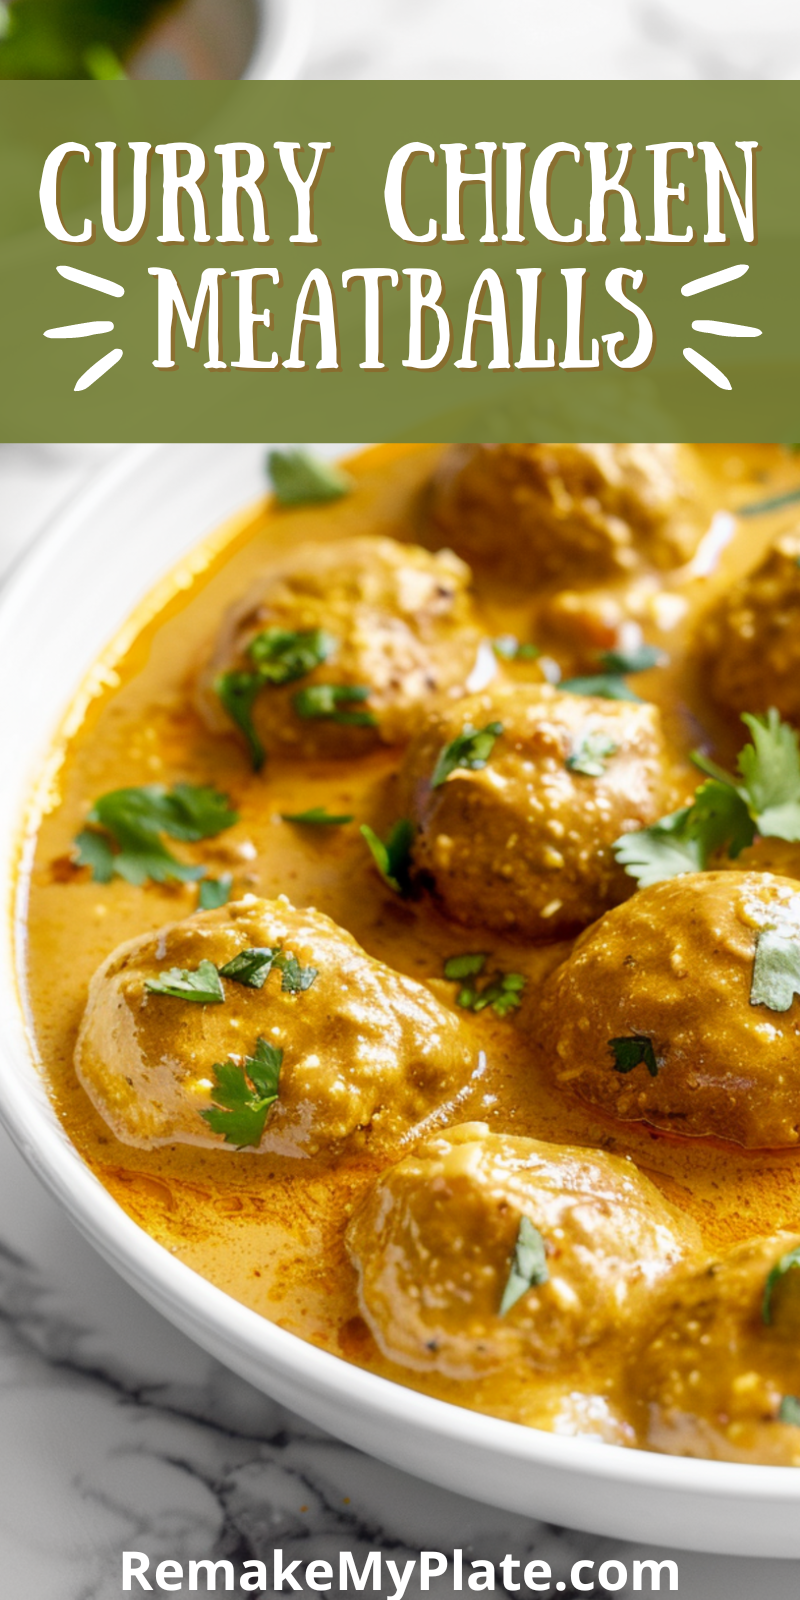 Pinterest pin image for curry chicken meatballs recipe